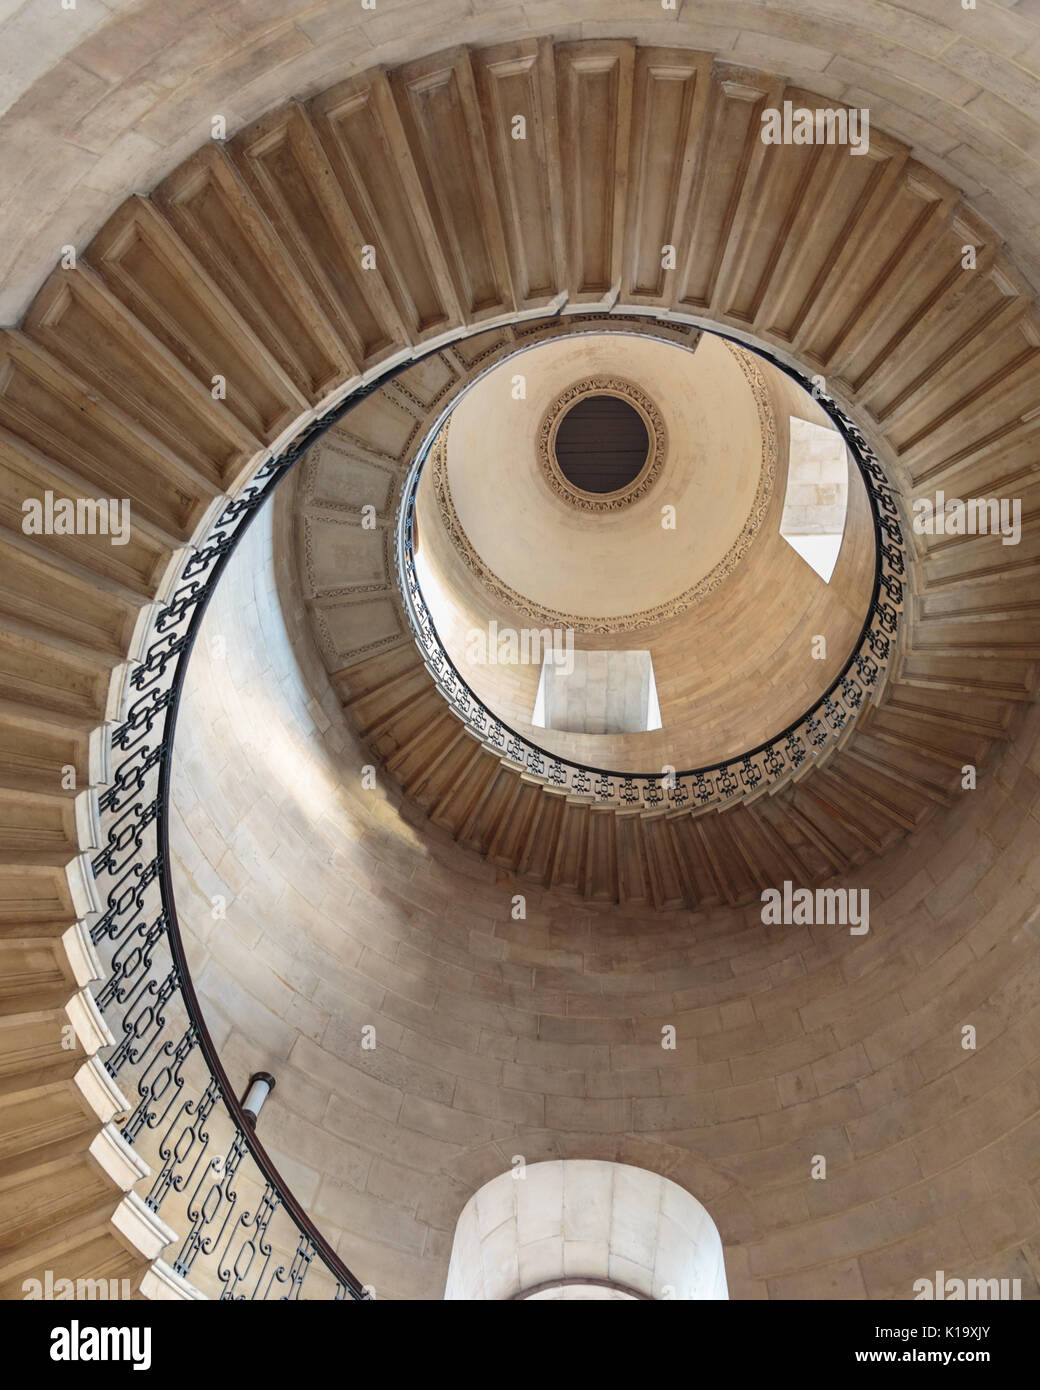 The Dean's Staircase, St Paul's Cathedral, spiral stairs made famous as the Divination Stairwell in scenes from the Harry Potter films, London UK Stock Photo